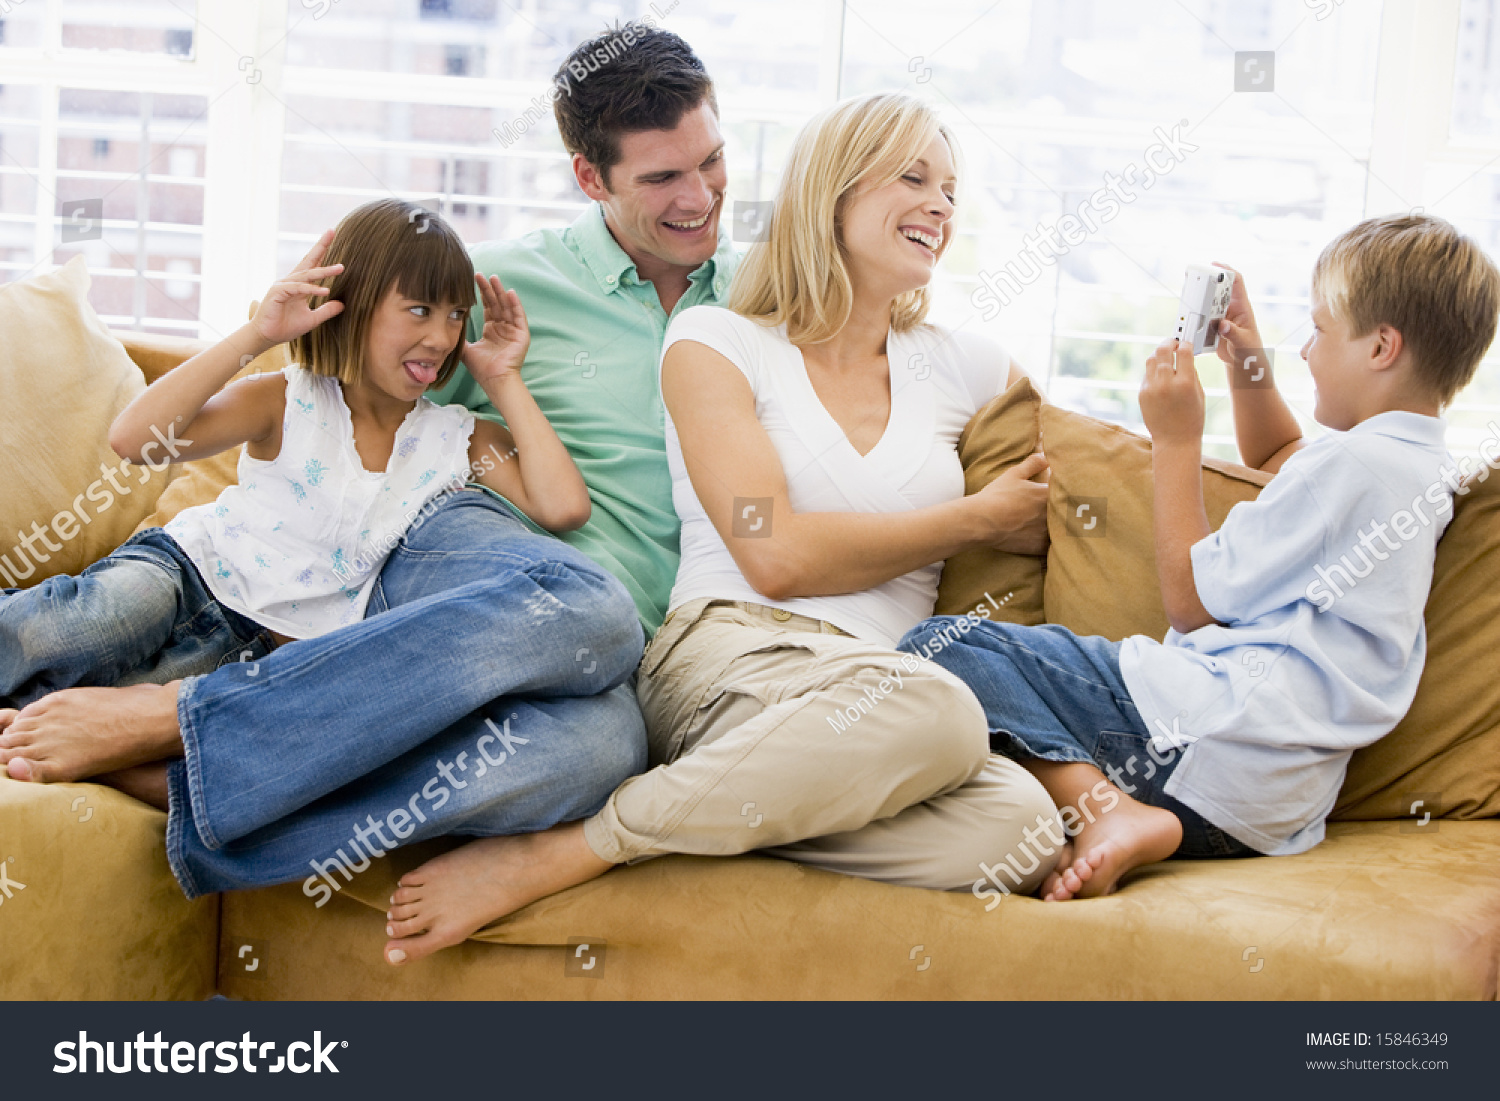 Family sitting in living room with digital camera smiling #15846349